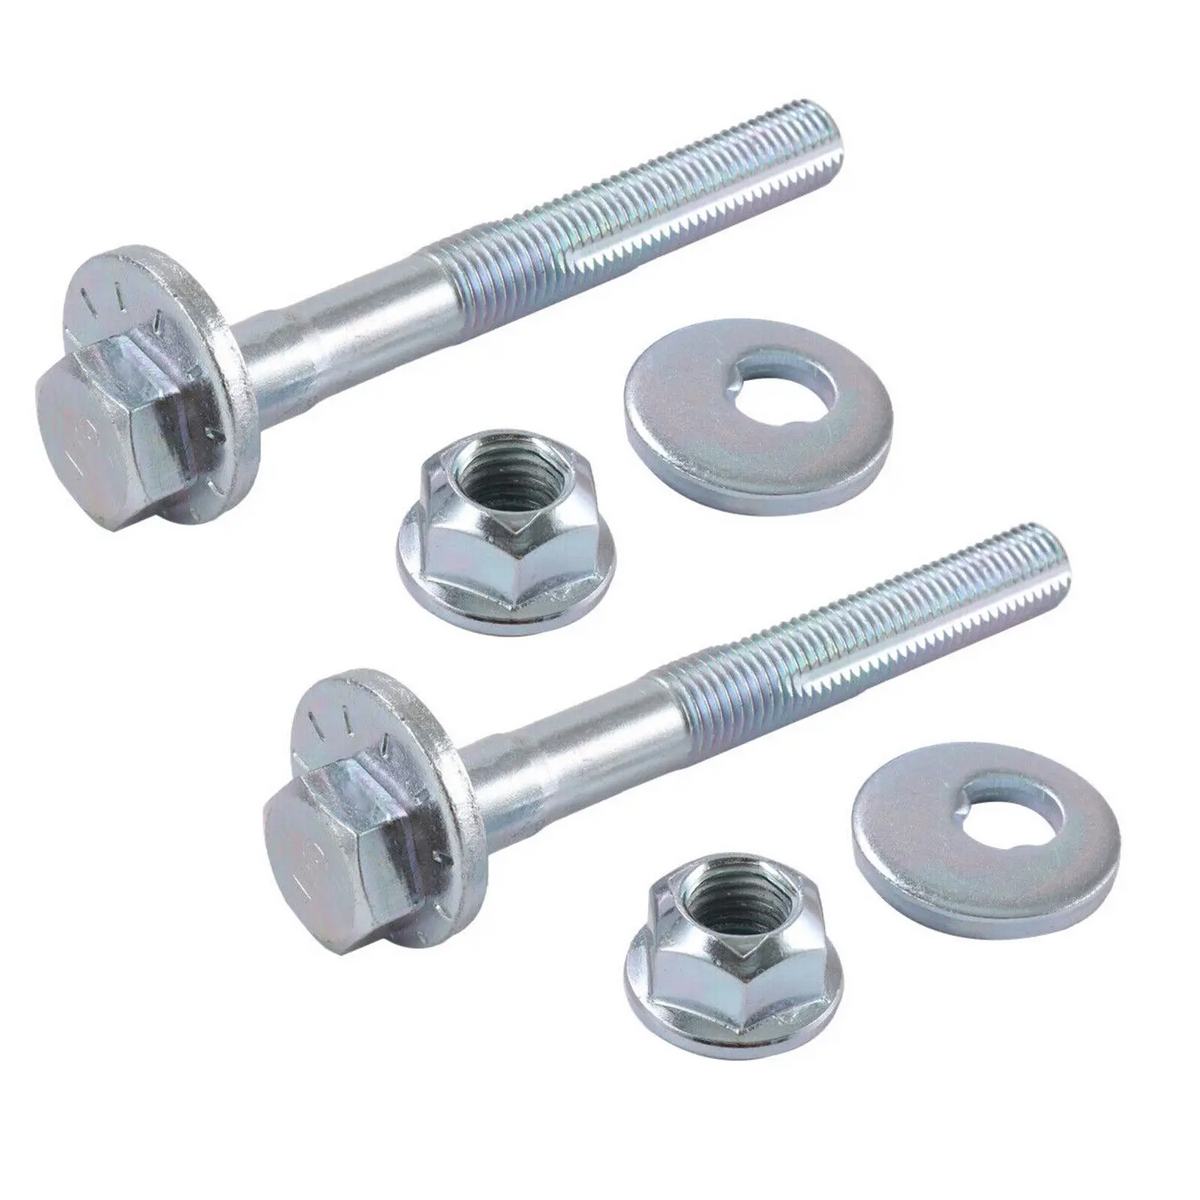 2x Rear Suspension Camber Arm Bolt Kit for Cadillac: BLS, Fiat: Croma, Opel: Signum, Vectra, Saab: 43899.0,